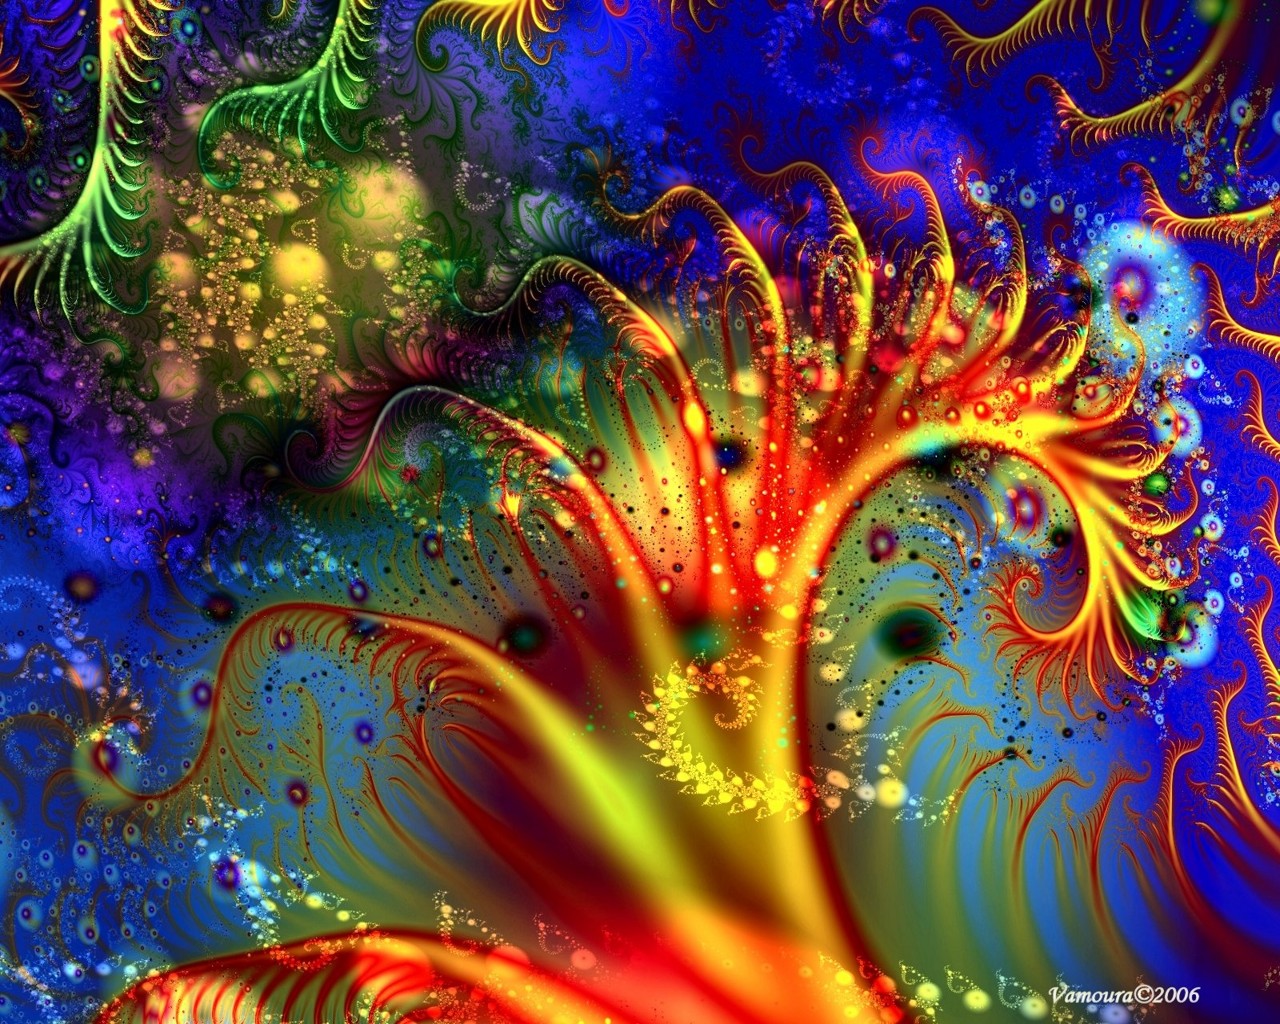 Rate Select Rating Give Colorful Fractals